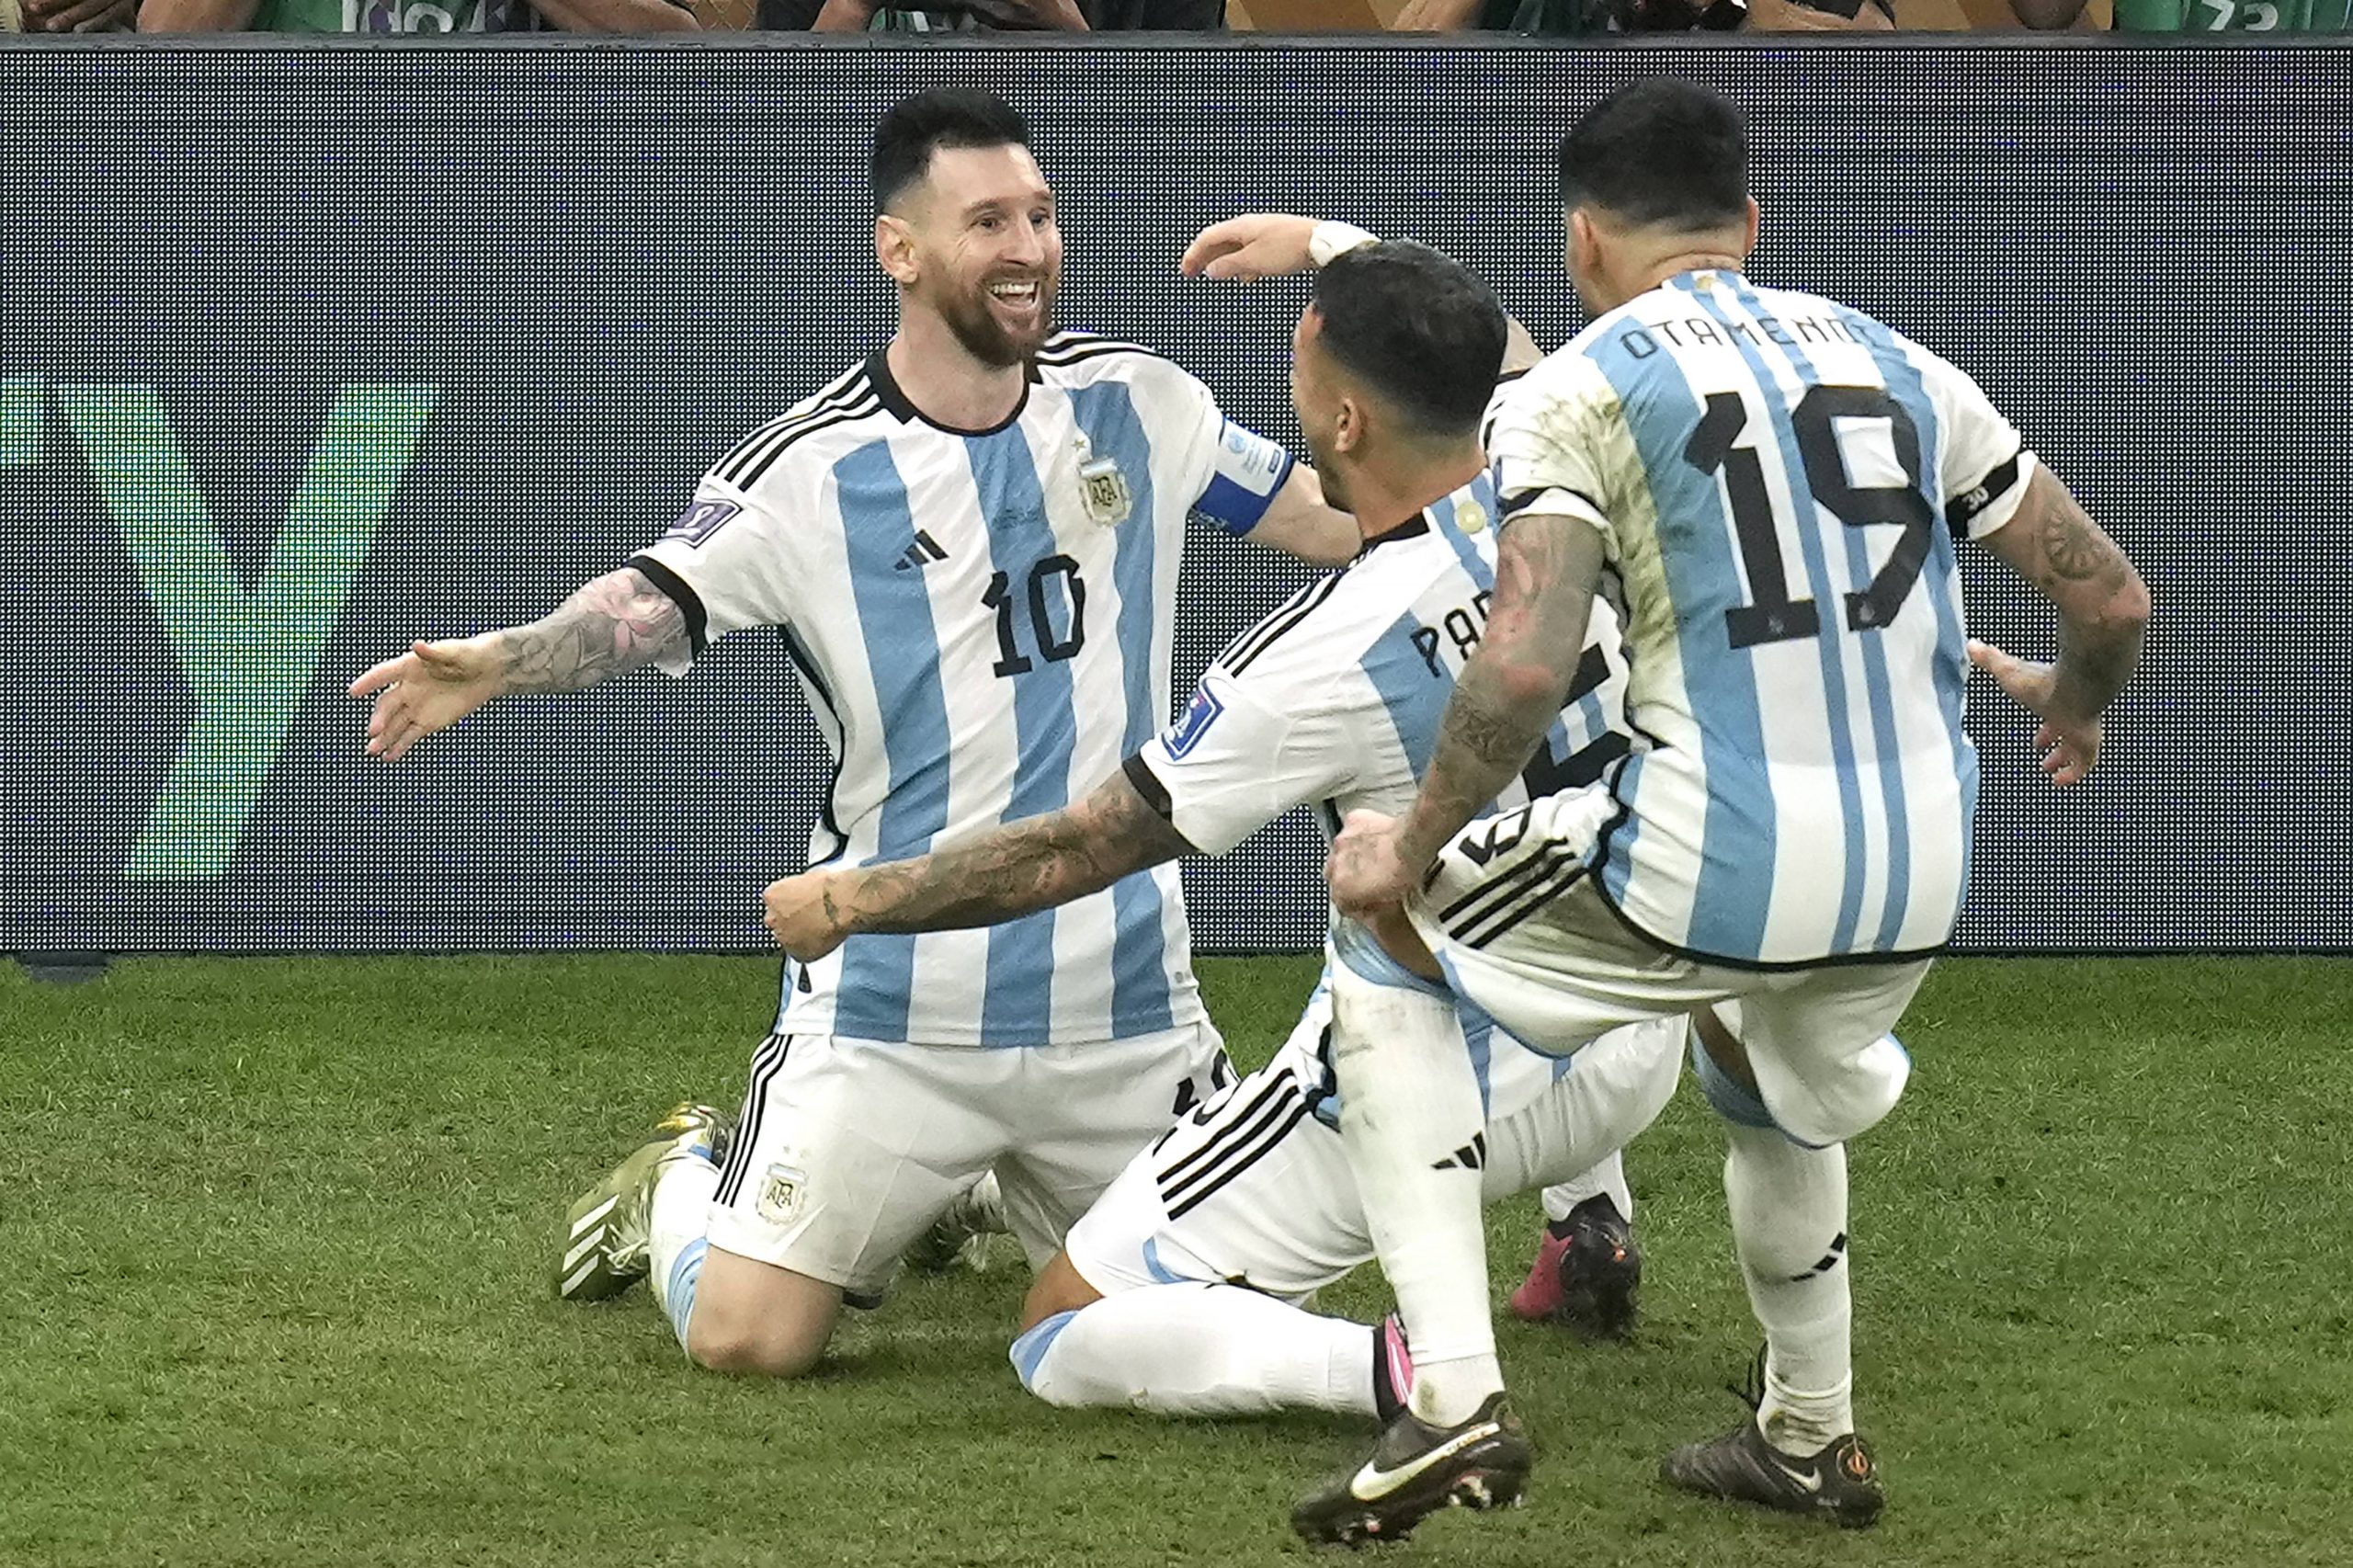 Lionel Messi drops to his knees, bursts into tears the moment Argentina wins World Cup: Watch